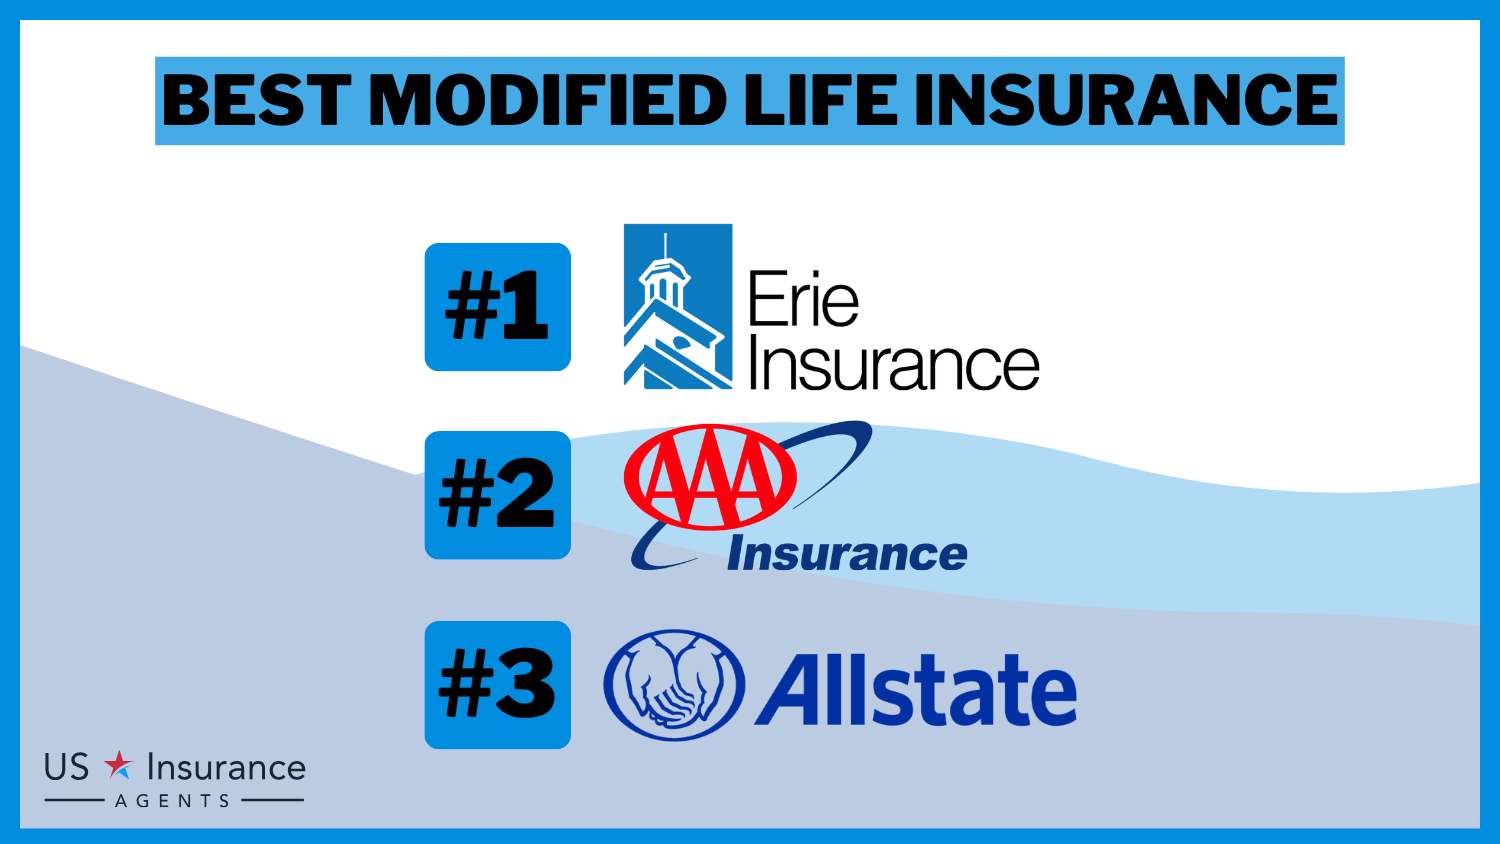 Best Modified Life Insurance: Erie, AAA, Allstate